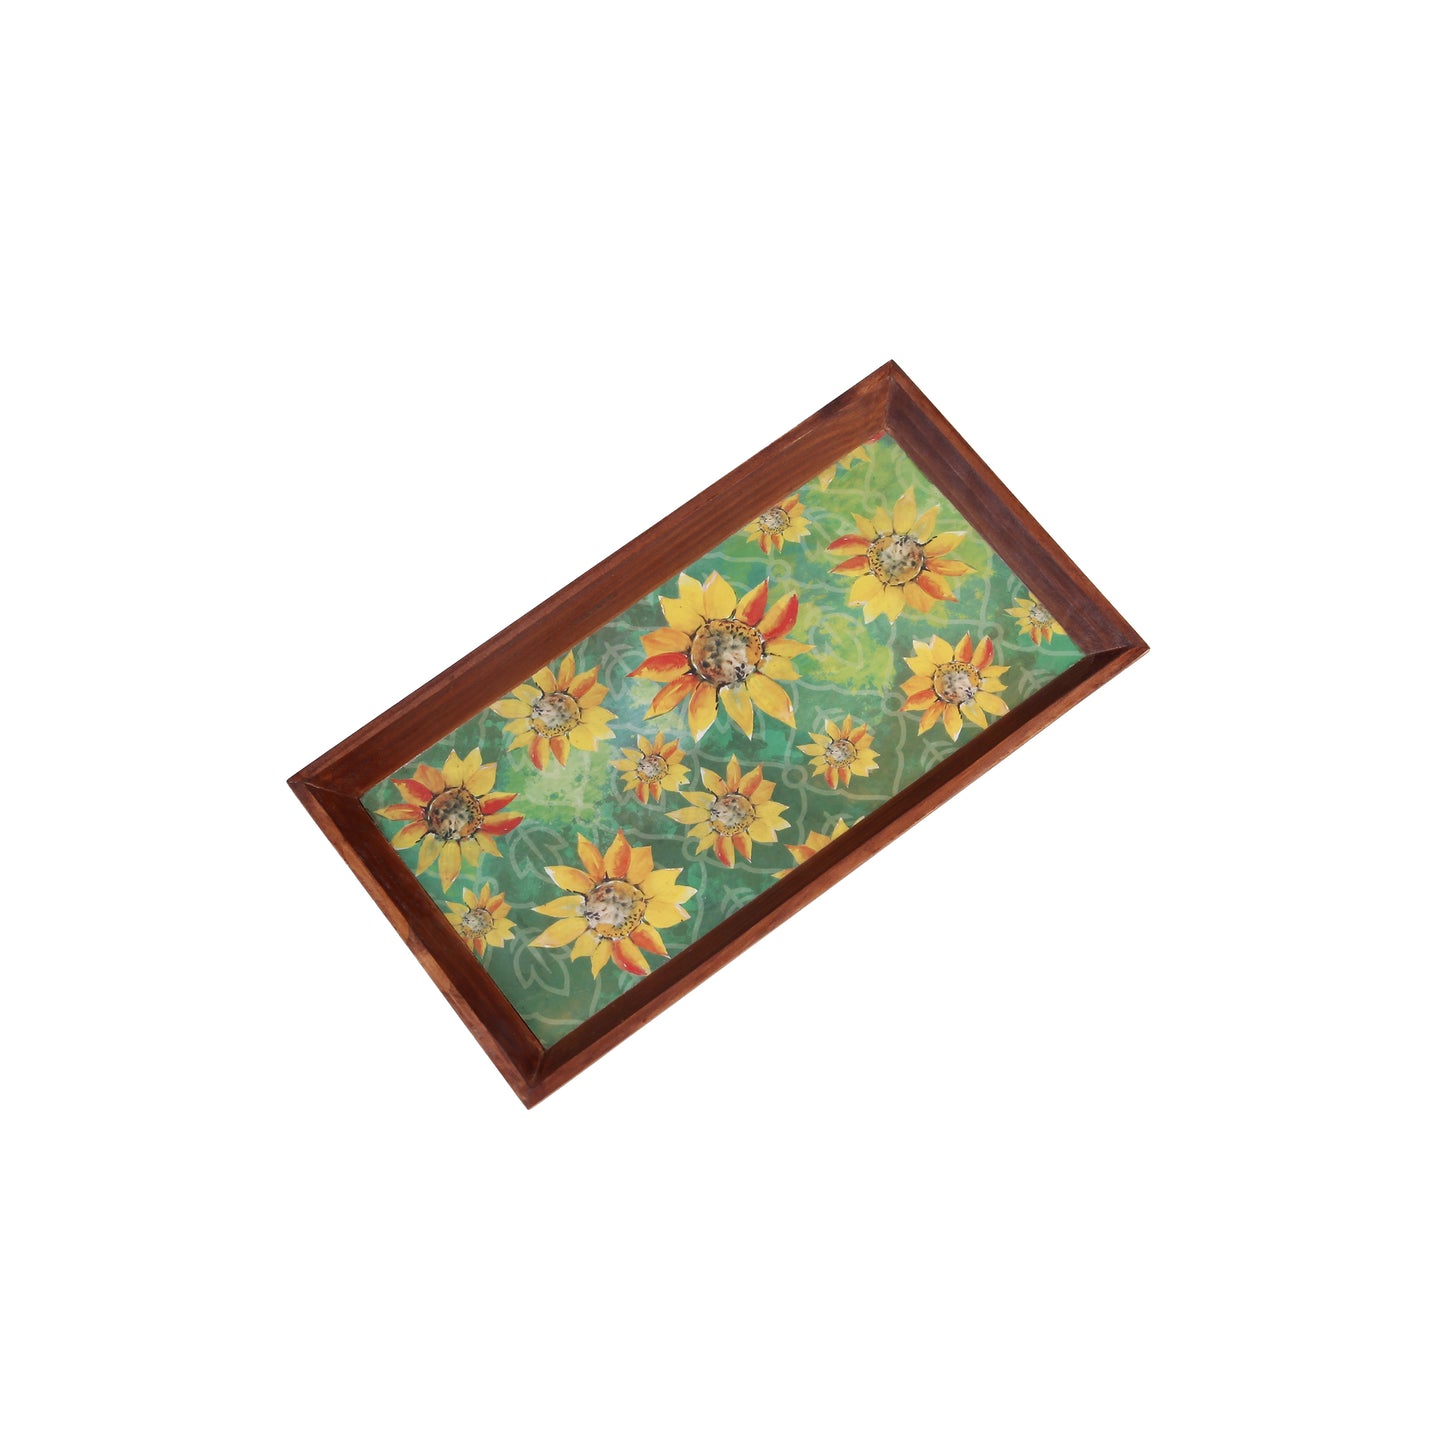 A Tiny Mistake Sunflowers Rectangle Wooden Serving Tray, 35 x 20 x 2 cm